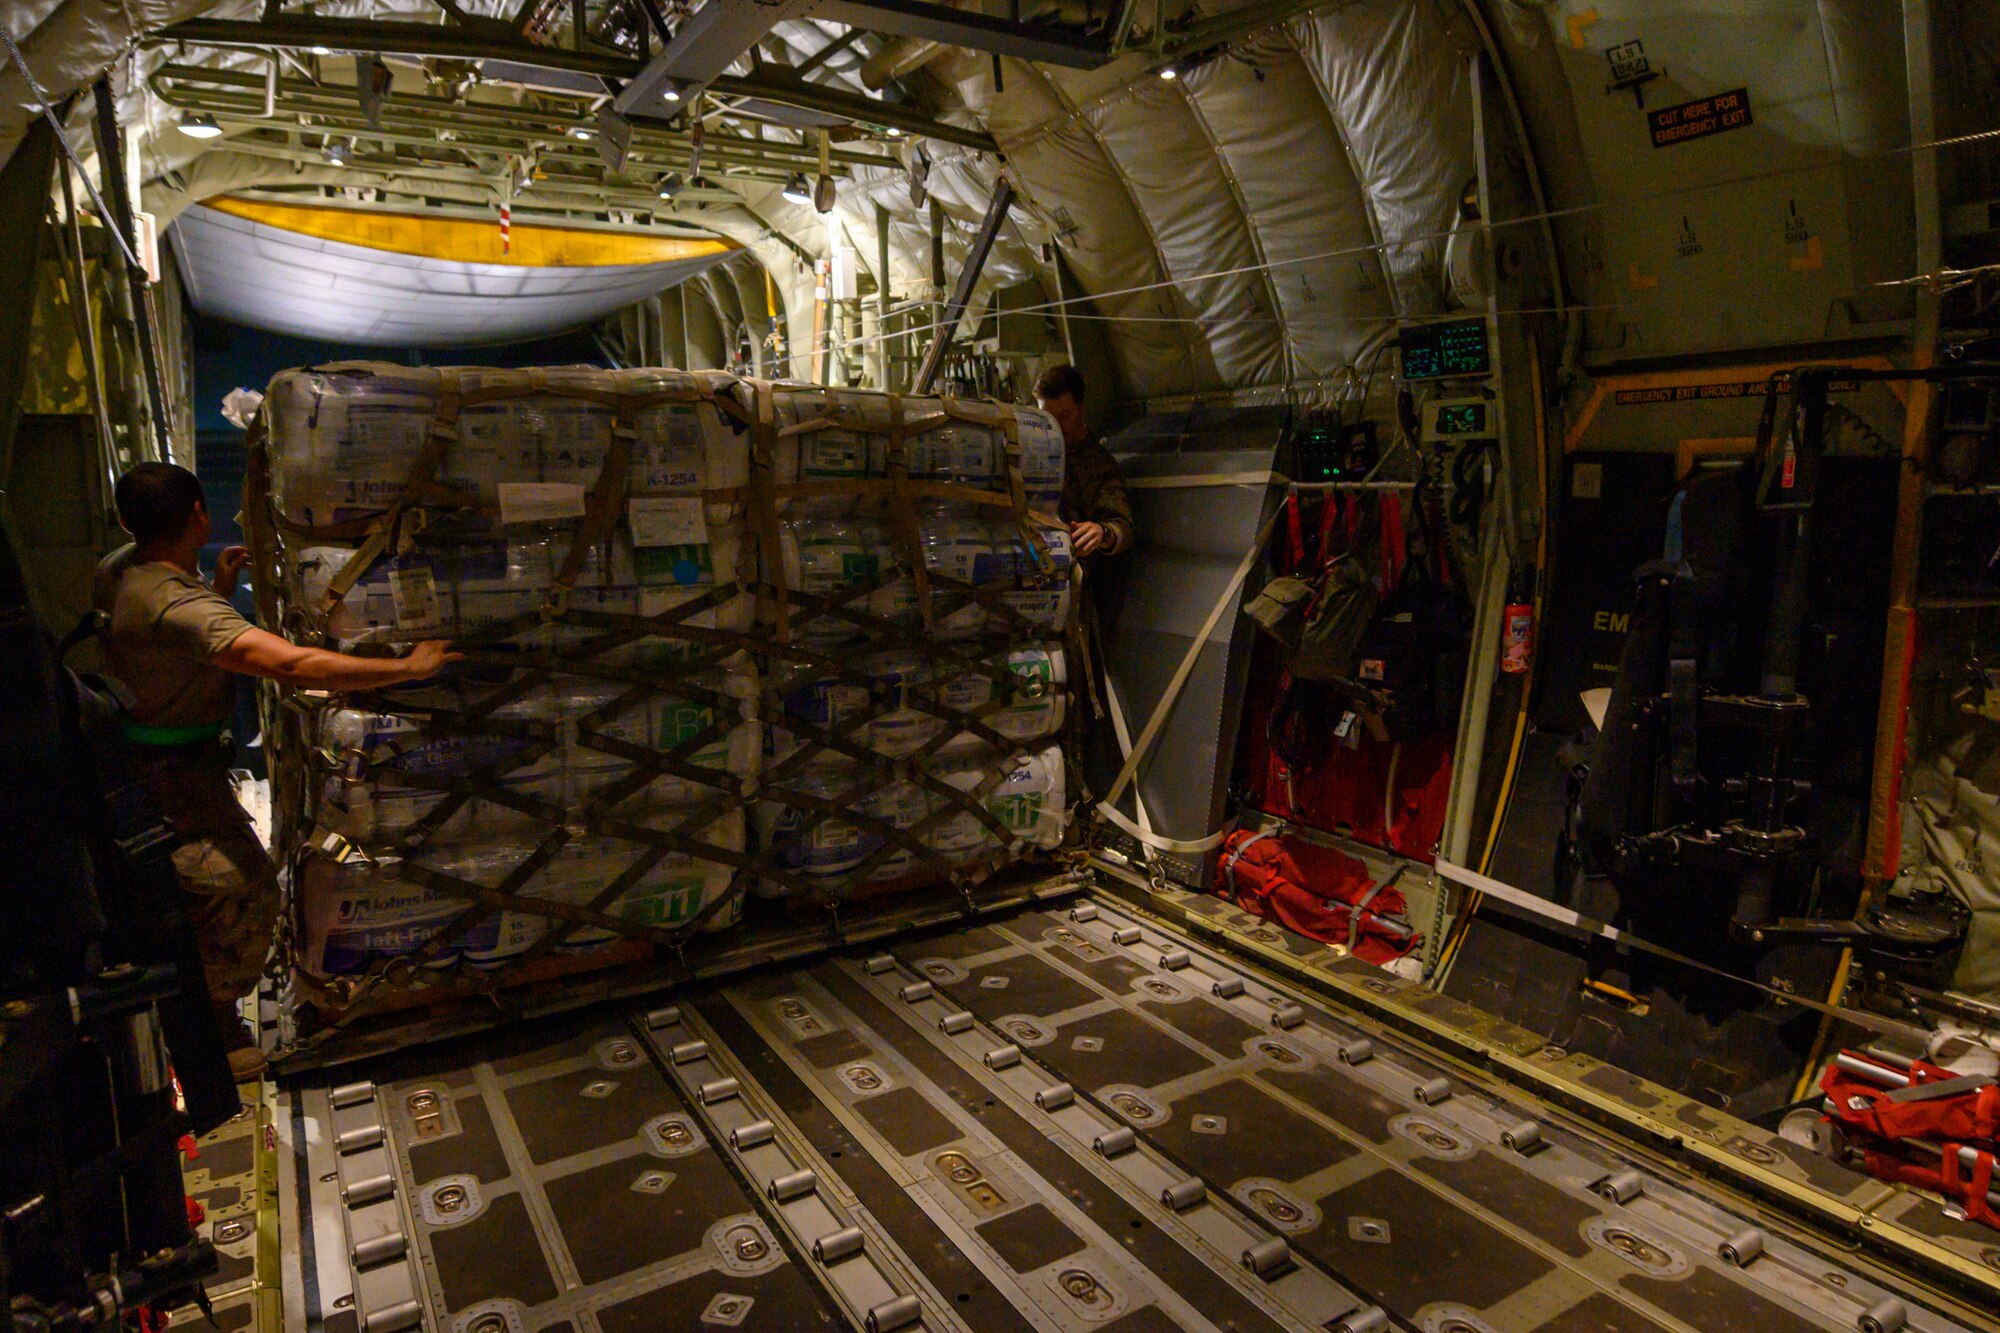 LRAFB continues resupply missions in East Africa